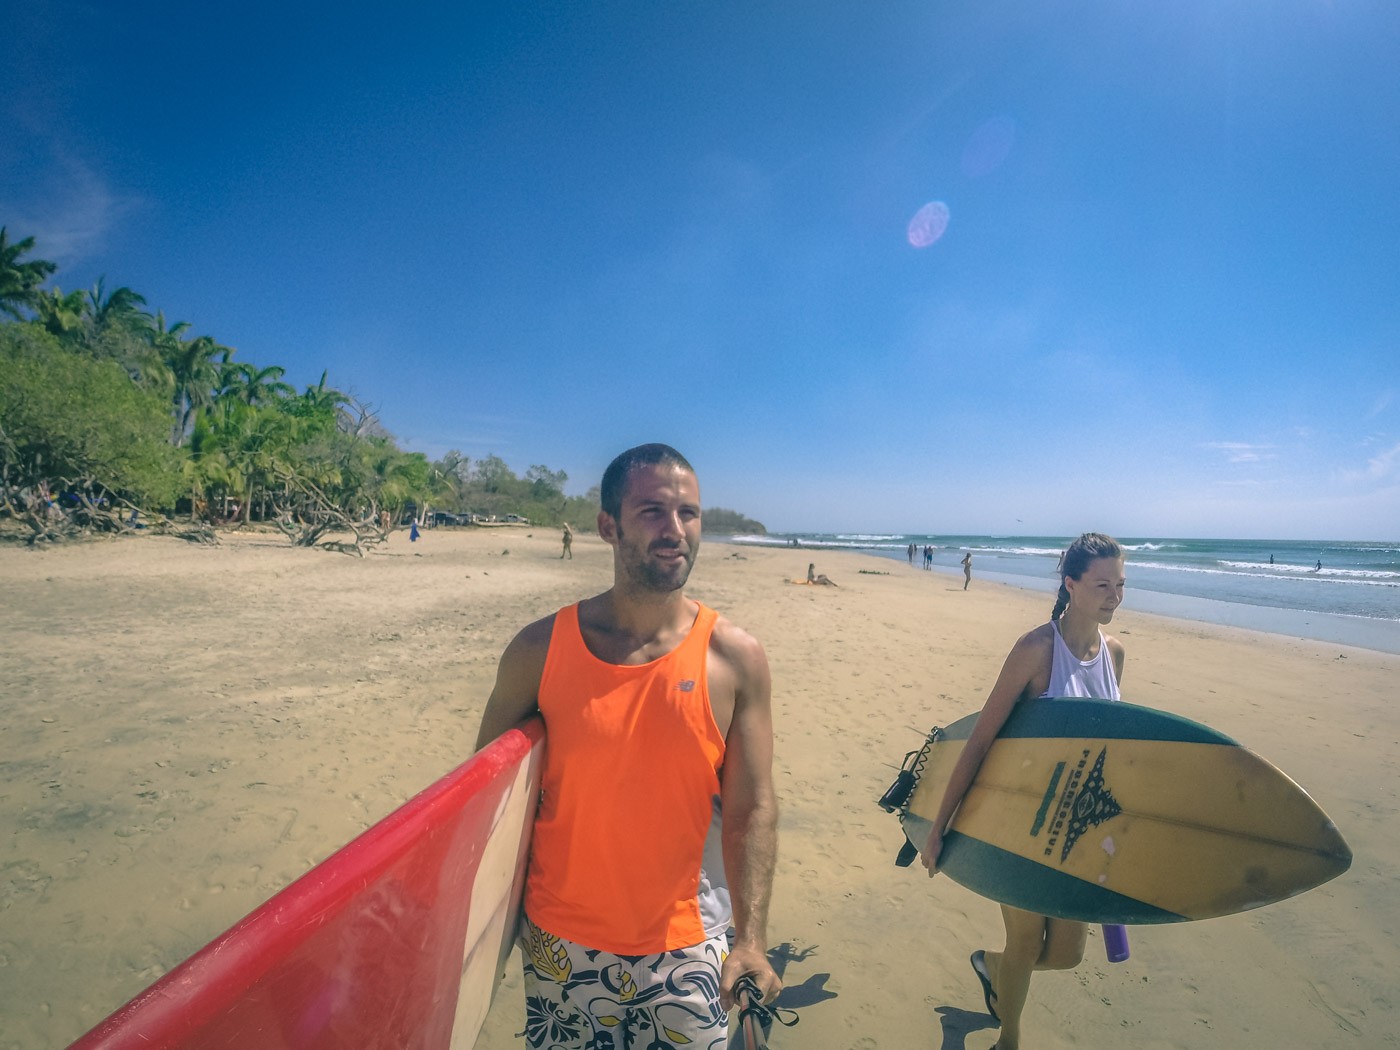 Max and Oksana heading out for a surf. Playa Avellanas. Costa Rica